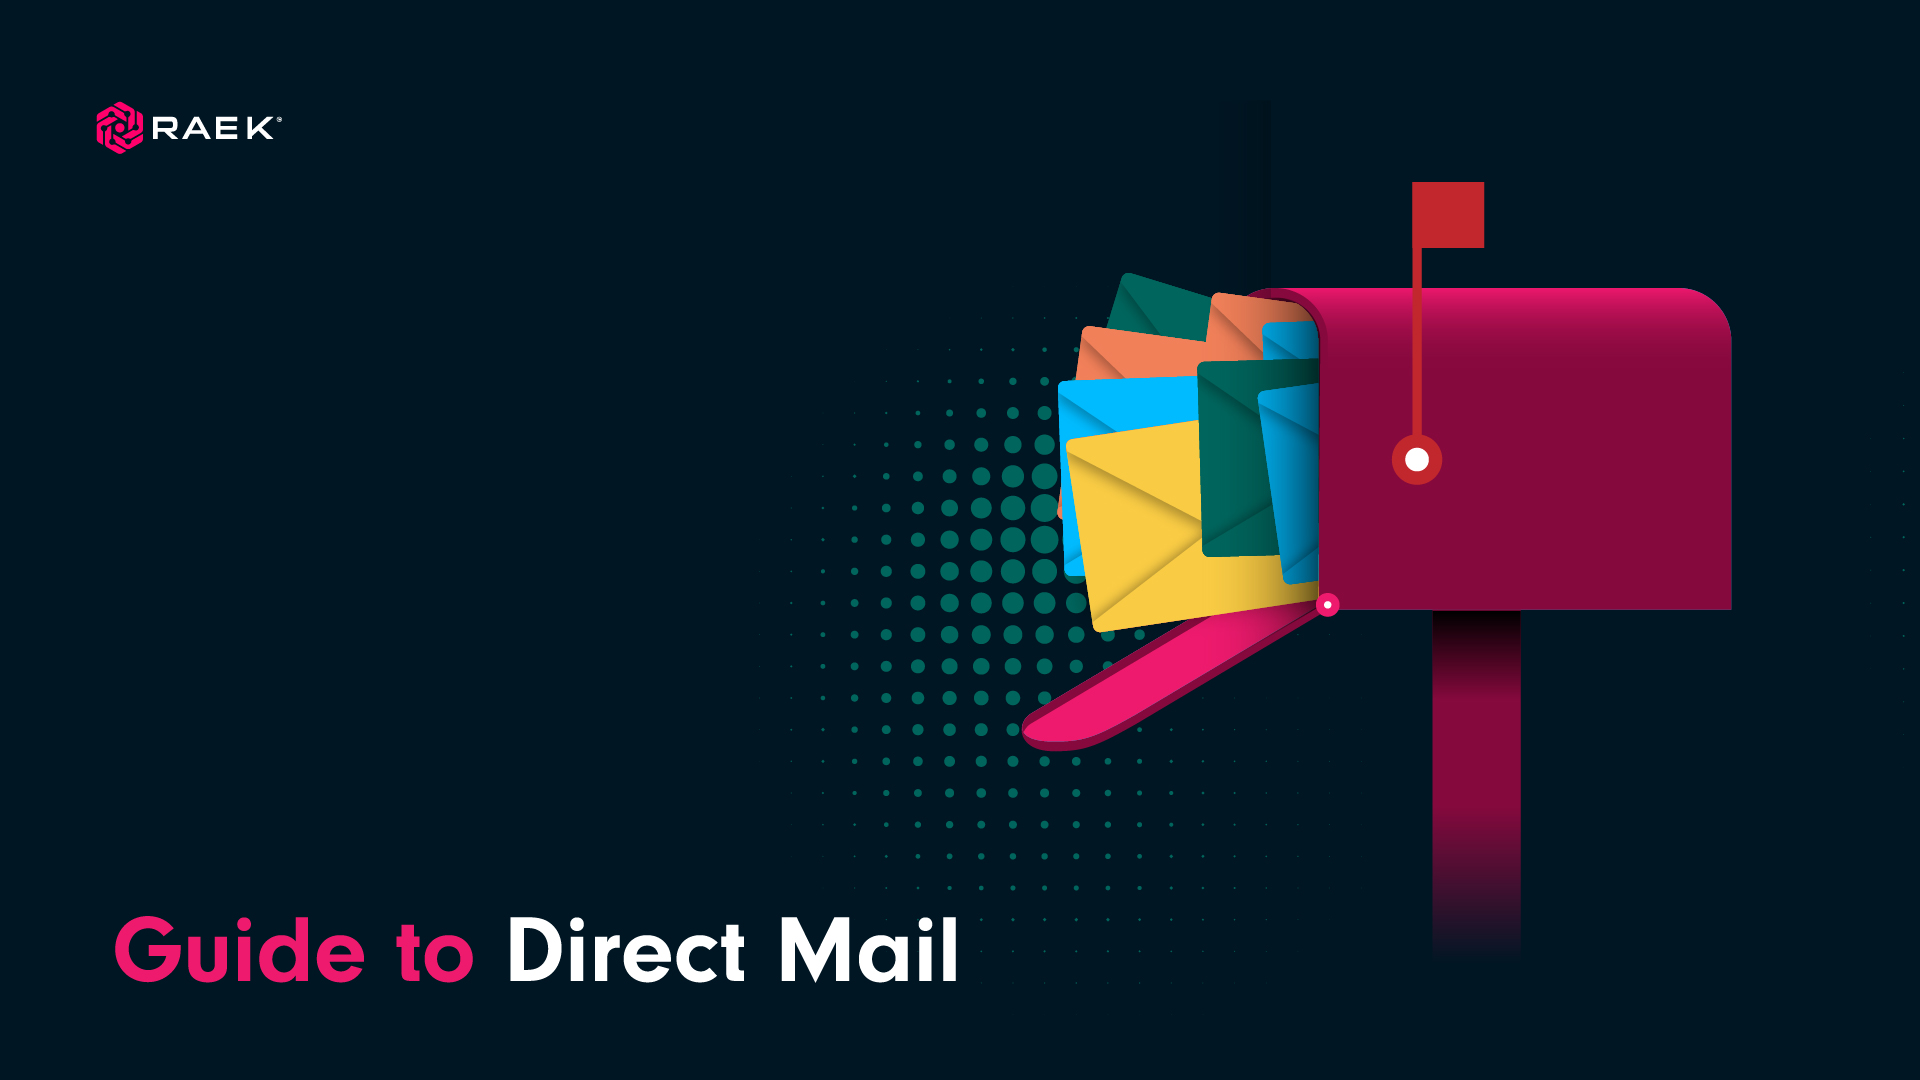 Guide to Direct Mail with 7 examples